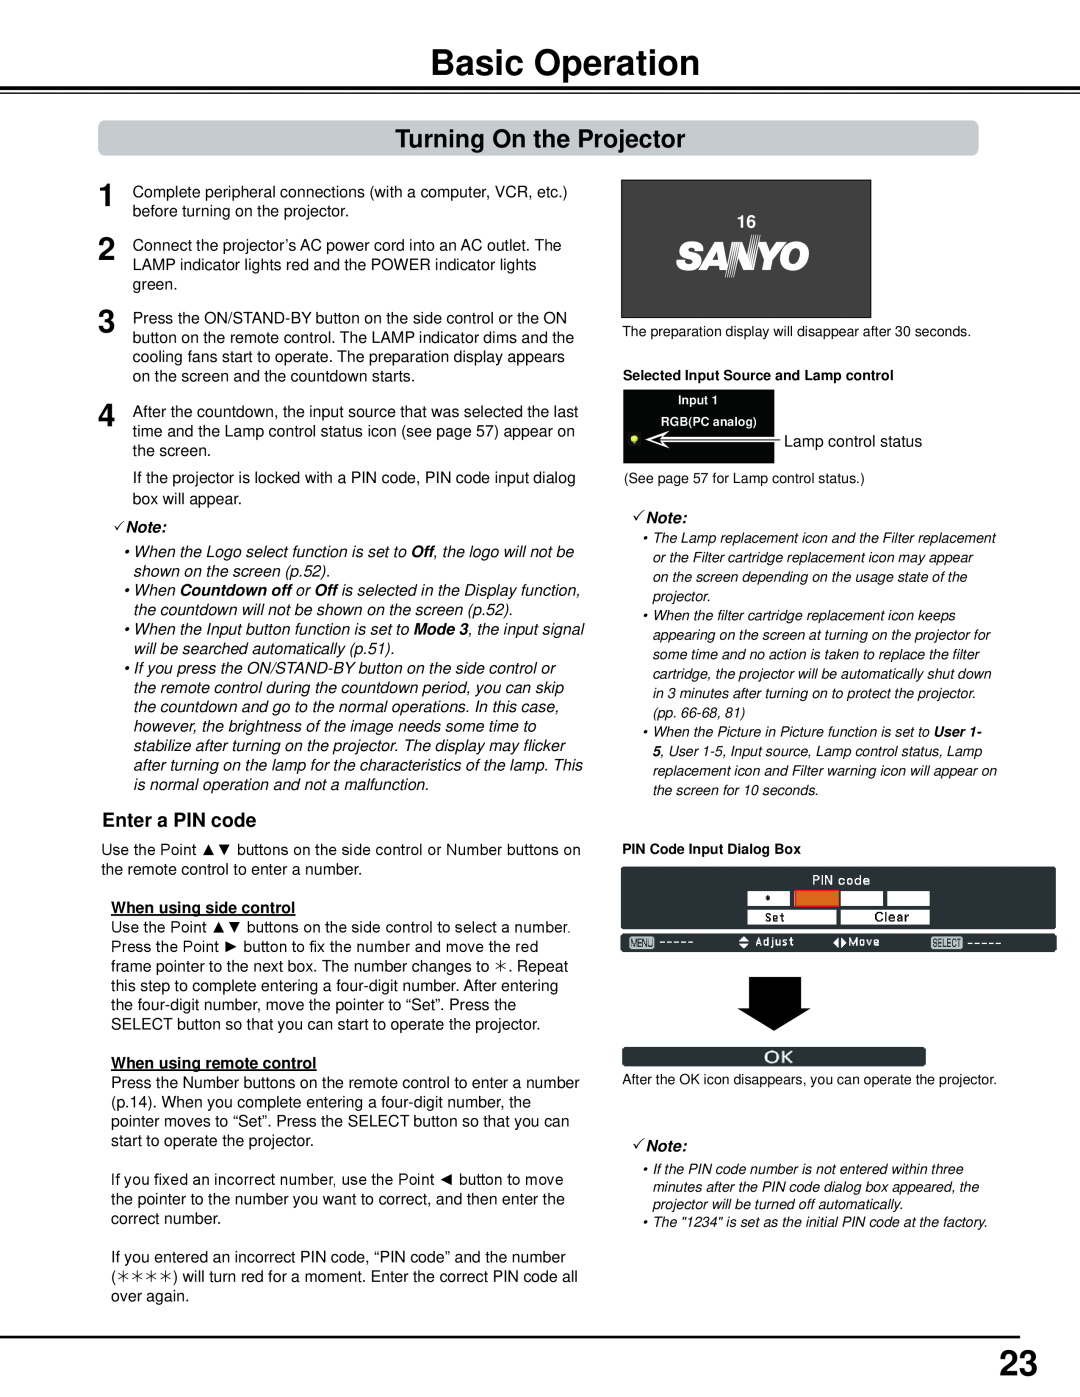 Sanyo PLC-WM5500, WM5500L Basic Operation, Turning On the Projector, Enter a PIN code, Note, When using side control 